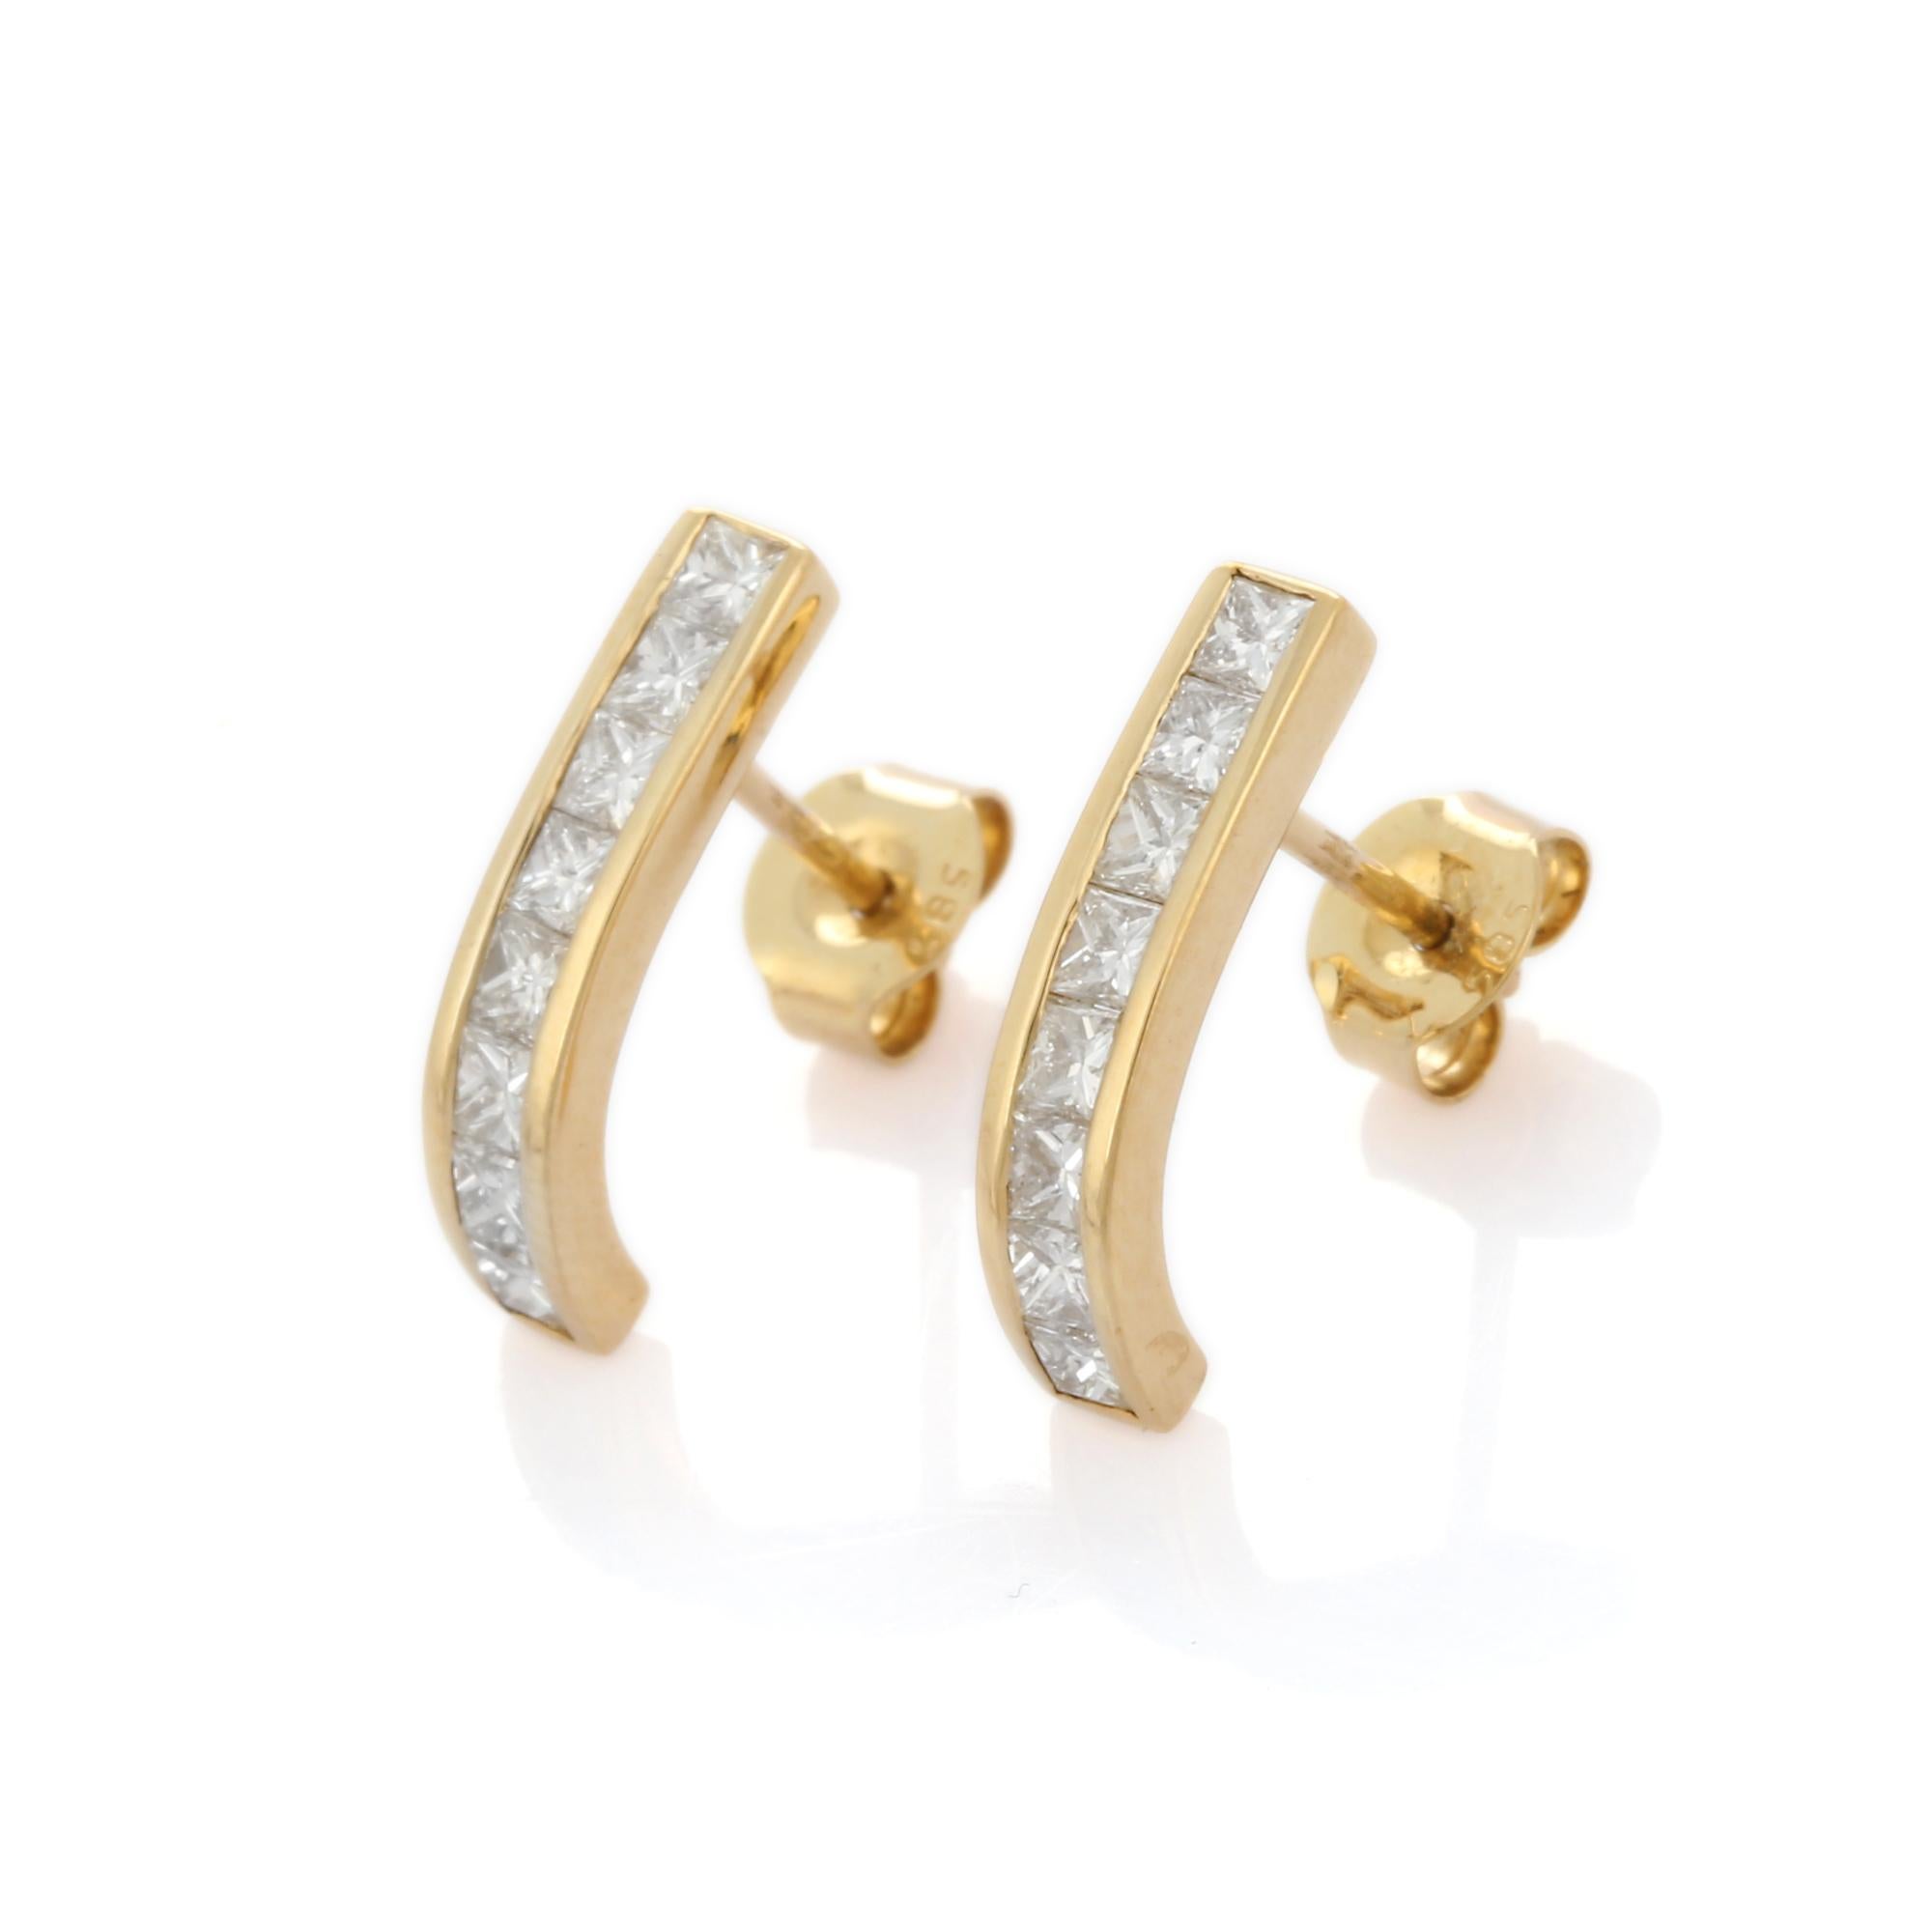 Princess Cut Diamond Bar Stud Earrings in 14K Gold to make a statement with your look. You shall need stud earrings to make a statement with your look. These earrings create a sparkling, luxurious look featuring square cut diamond.
April birthstone